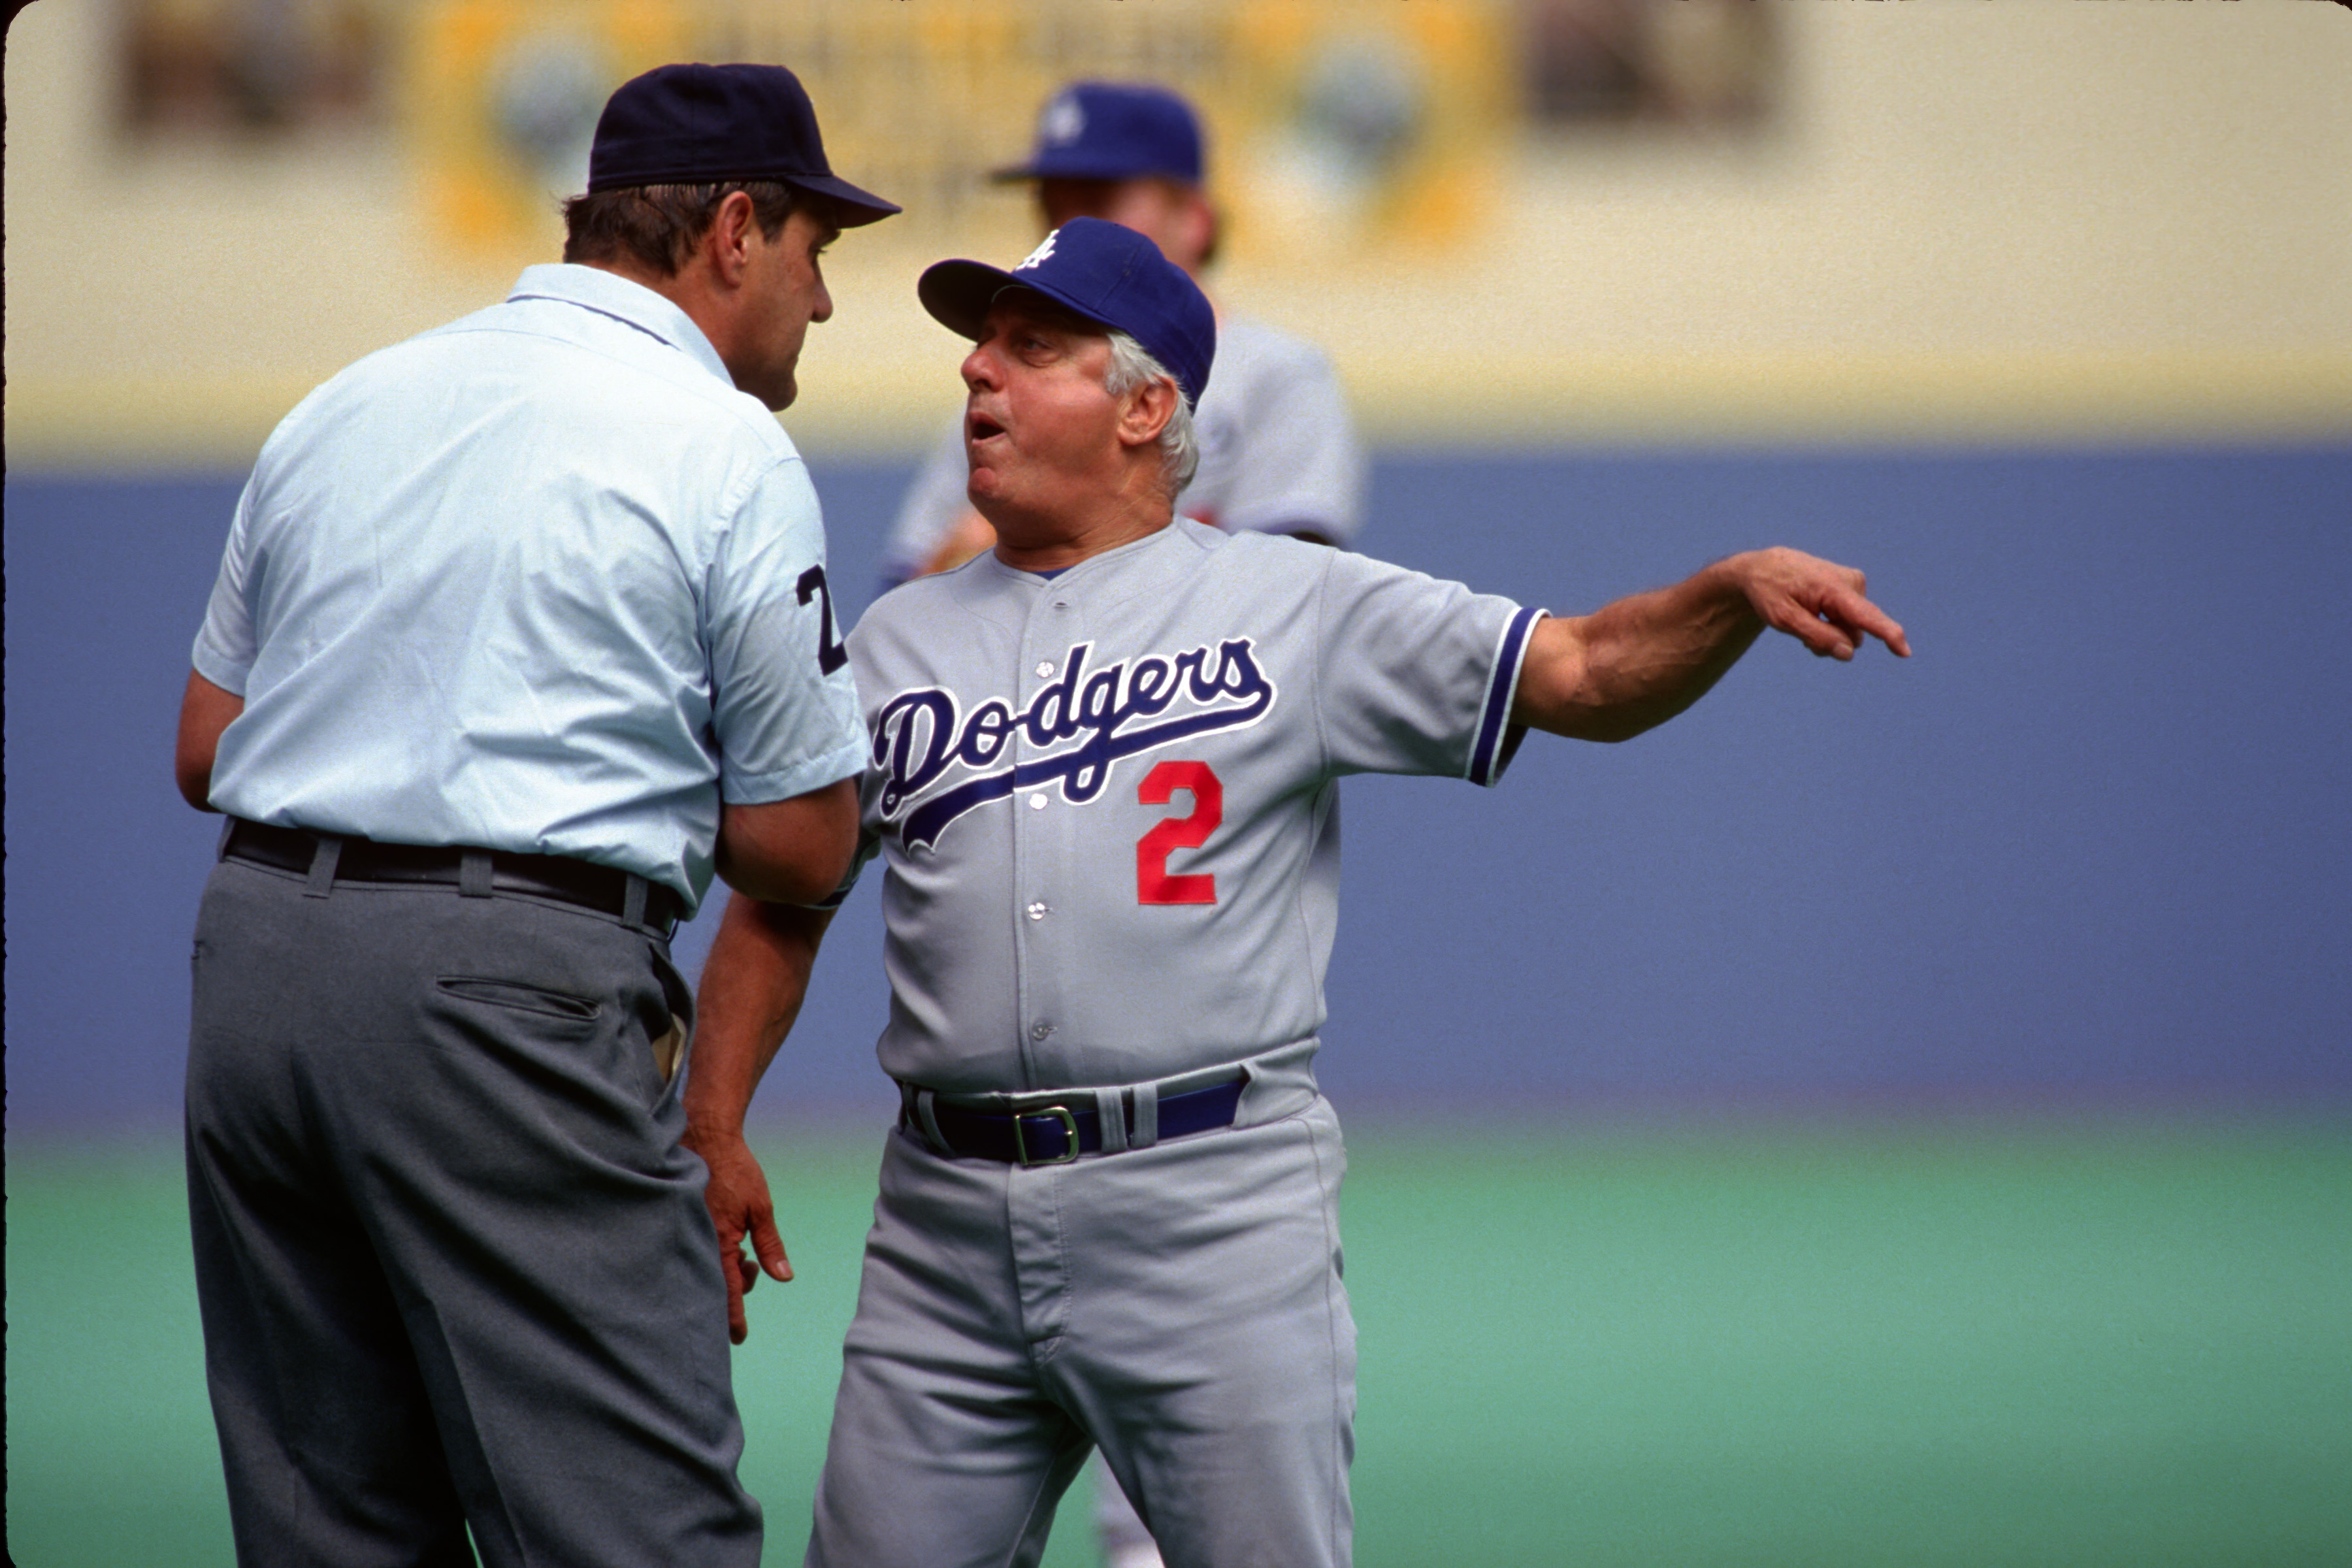 Dodgers: A look back at Tommy Lasorda's pitching career